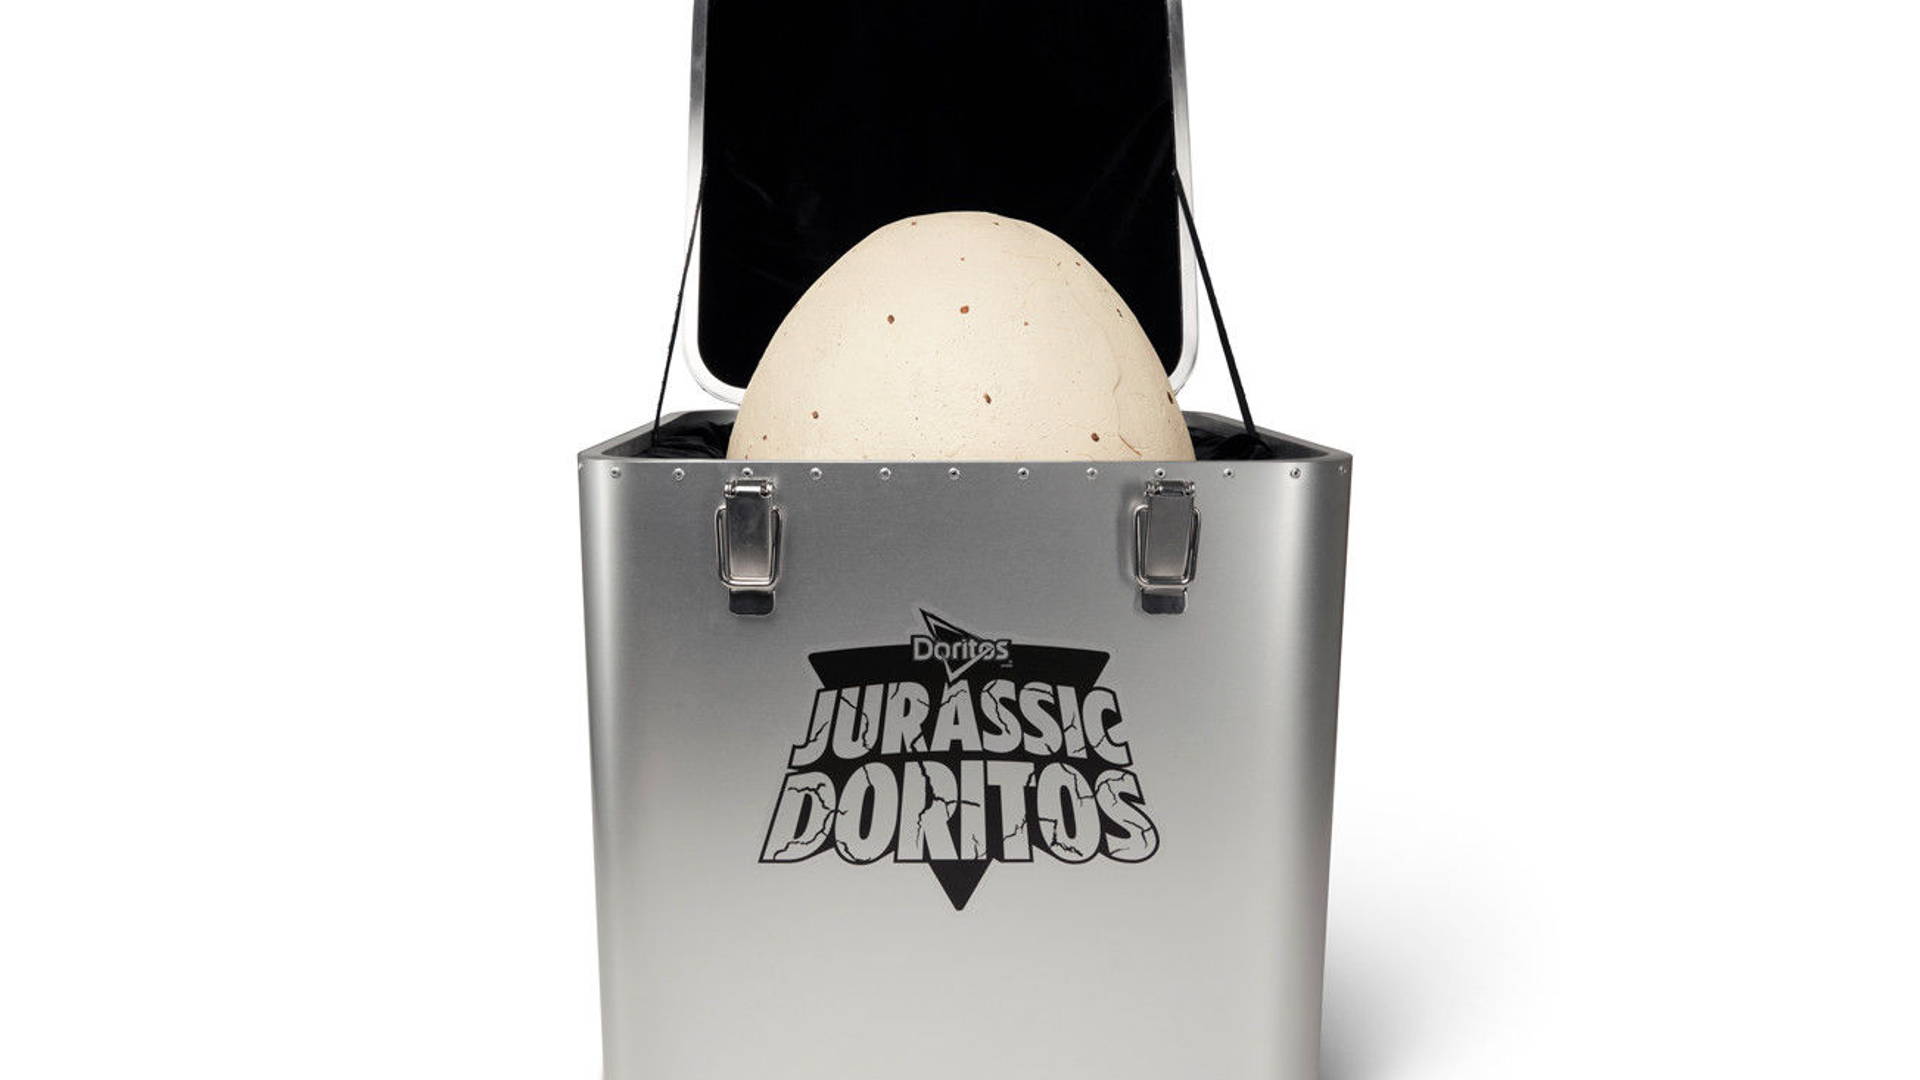 Featured image for Doritos’ Jurassic-Inspired Promotion is Nacho Ordinary Chip